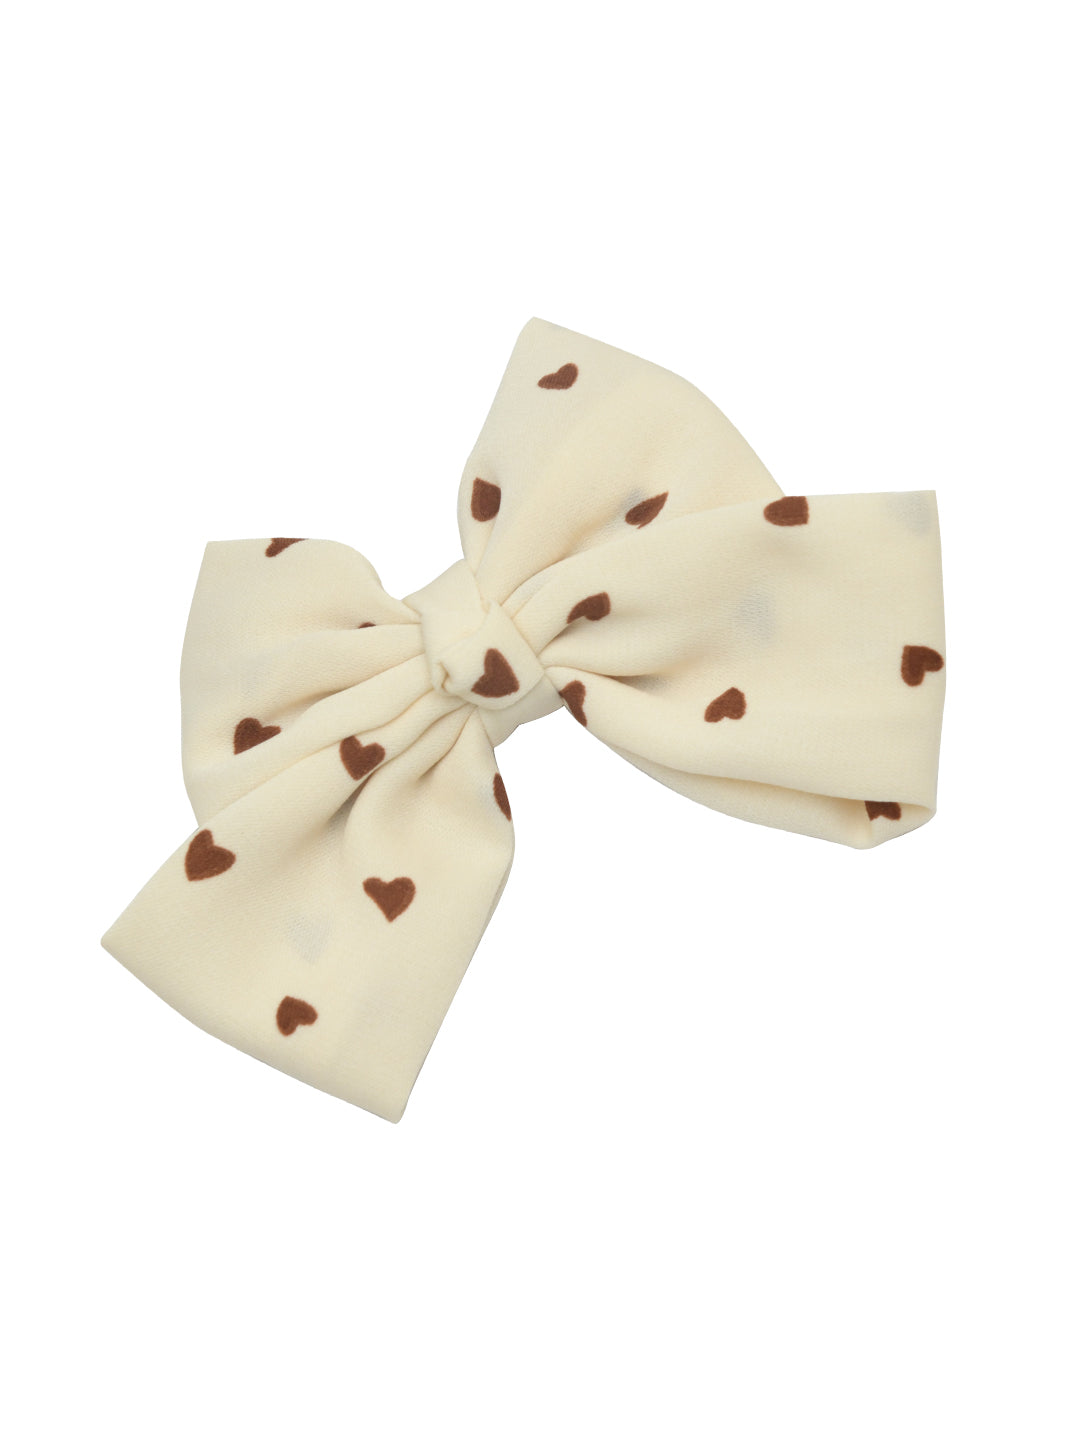 Multicolor Bow Hair Clip for Girls